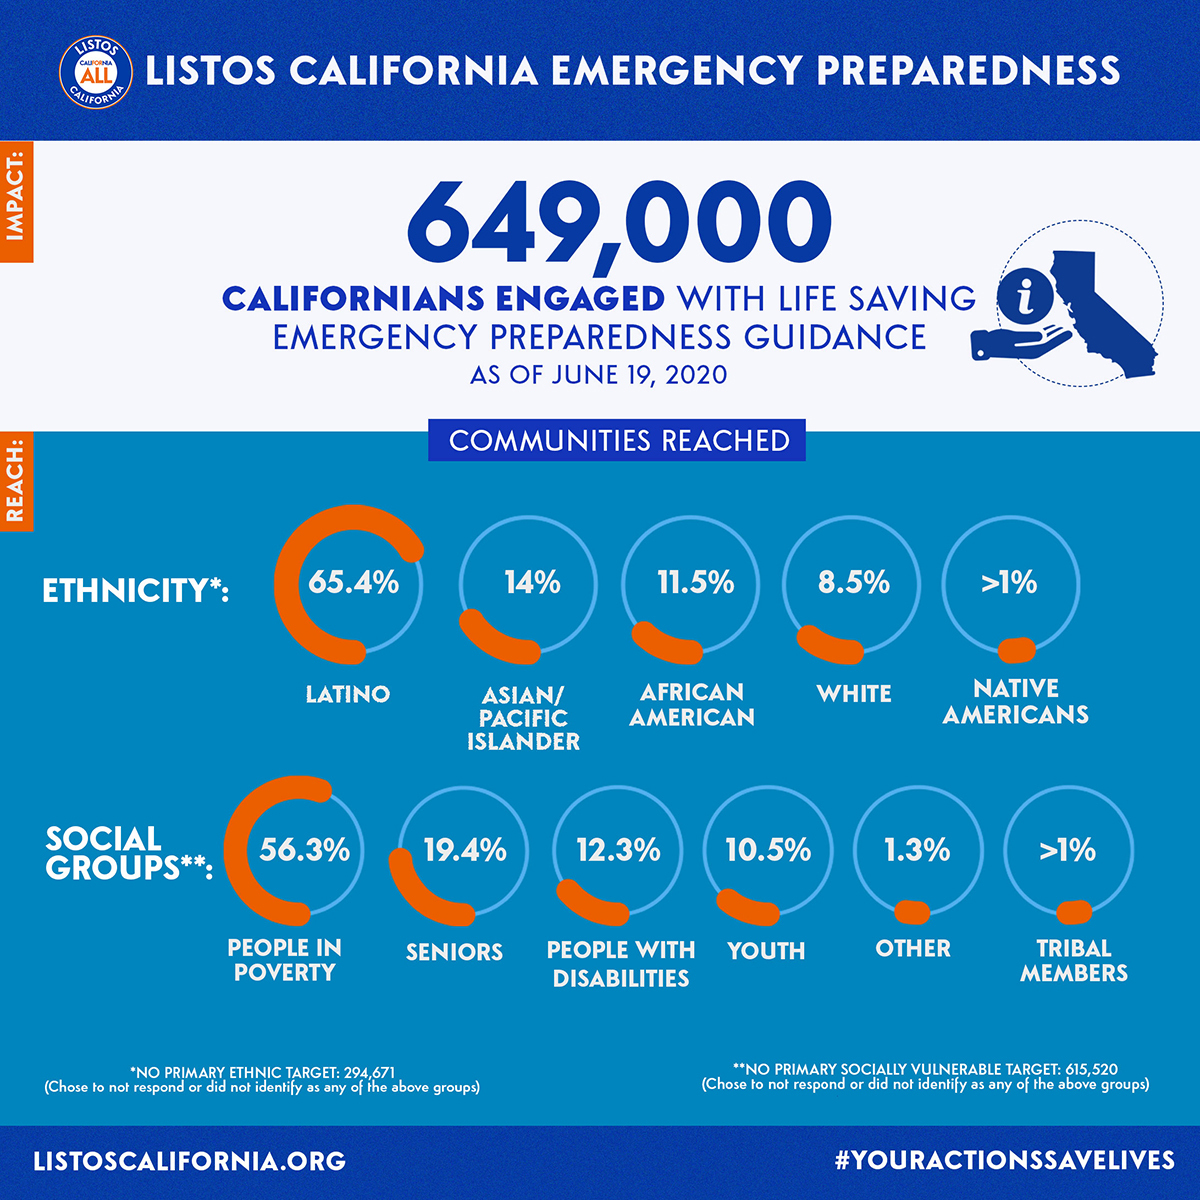 Reaching & connecting with California’s communities is more urgent than ever before. Through the power of partnerships and an effective use of data,  @ListosCA is meeting the moment & creating a new culture of preparedness in the Golden State.Learn more:  http://bit.ly/listosbythenumbers